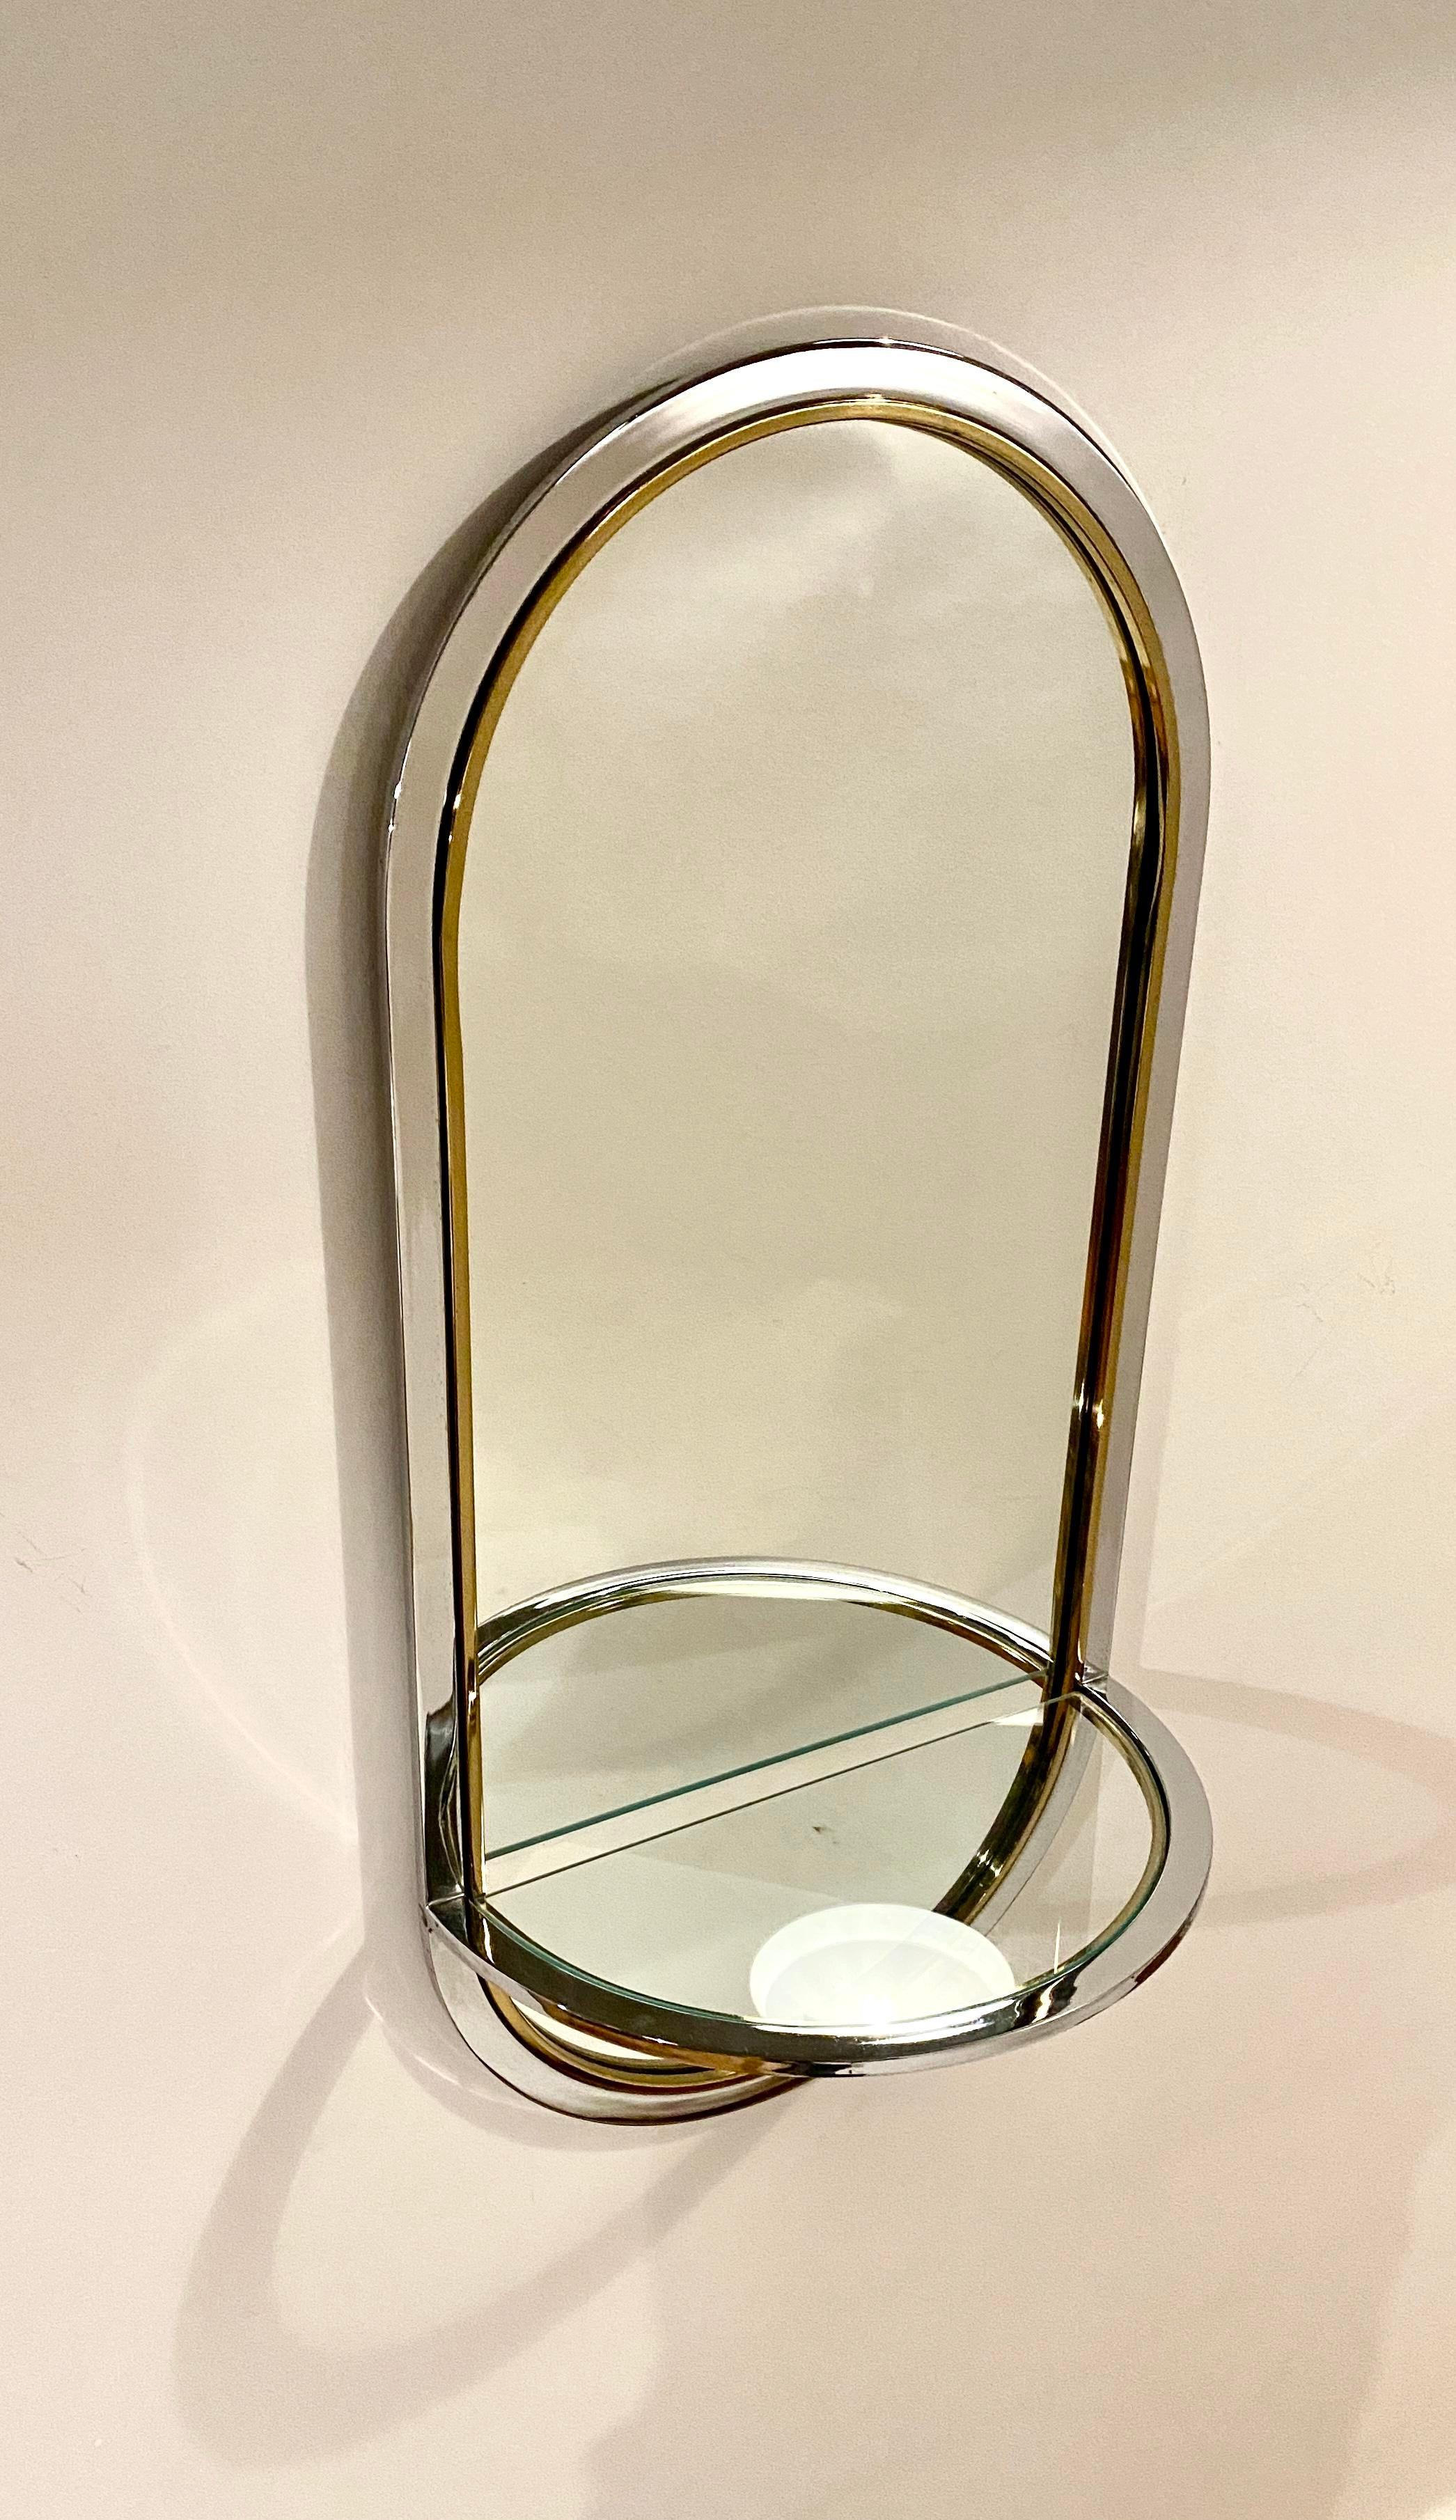 20th Century Leon Rosen Racetrack Wall Mirror for Pace, 1970's For Sale